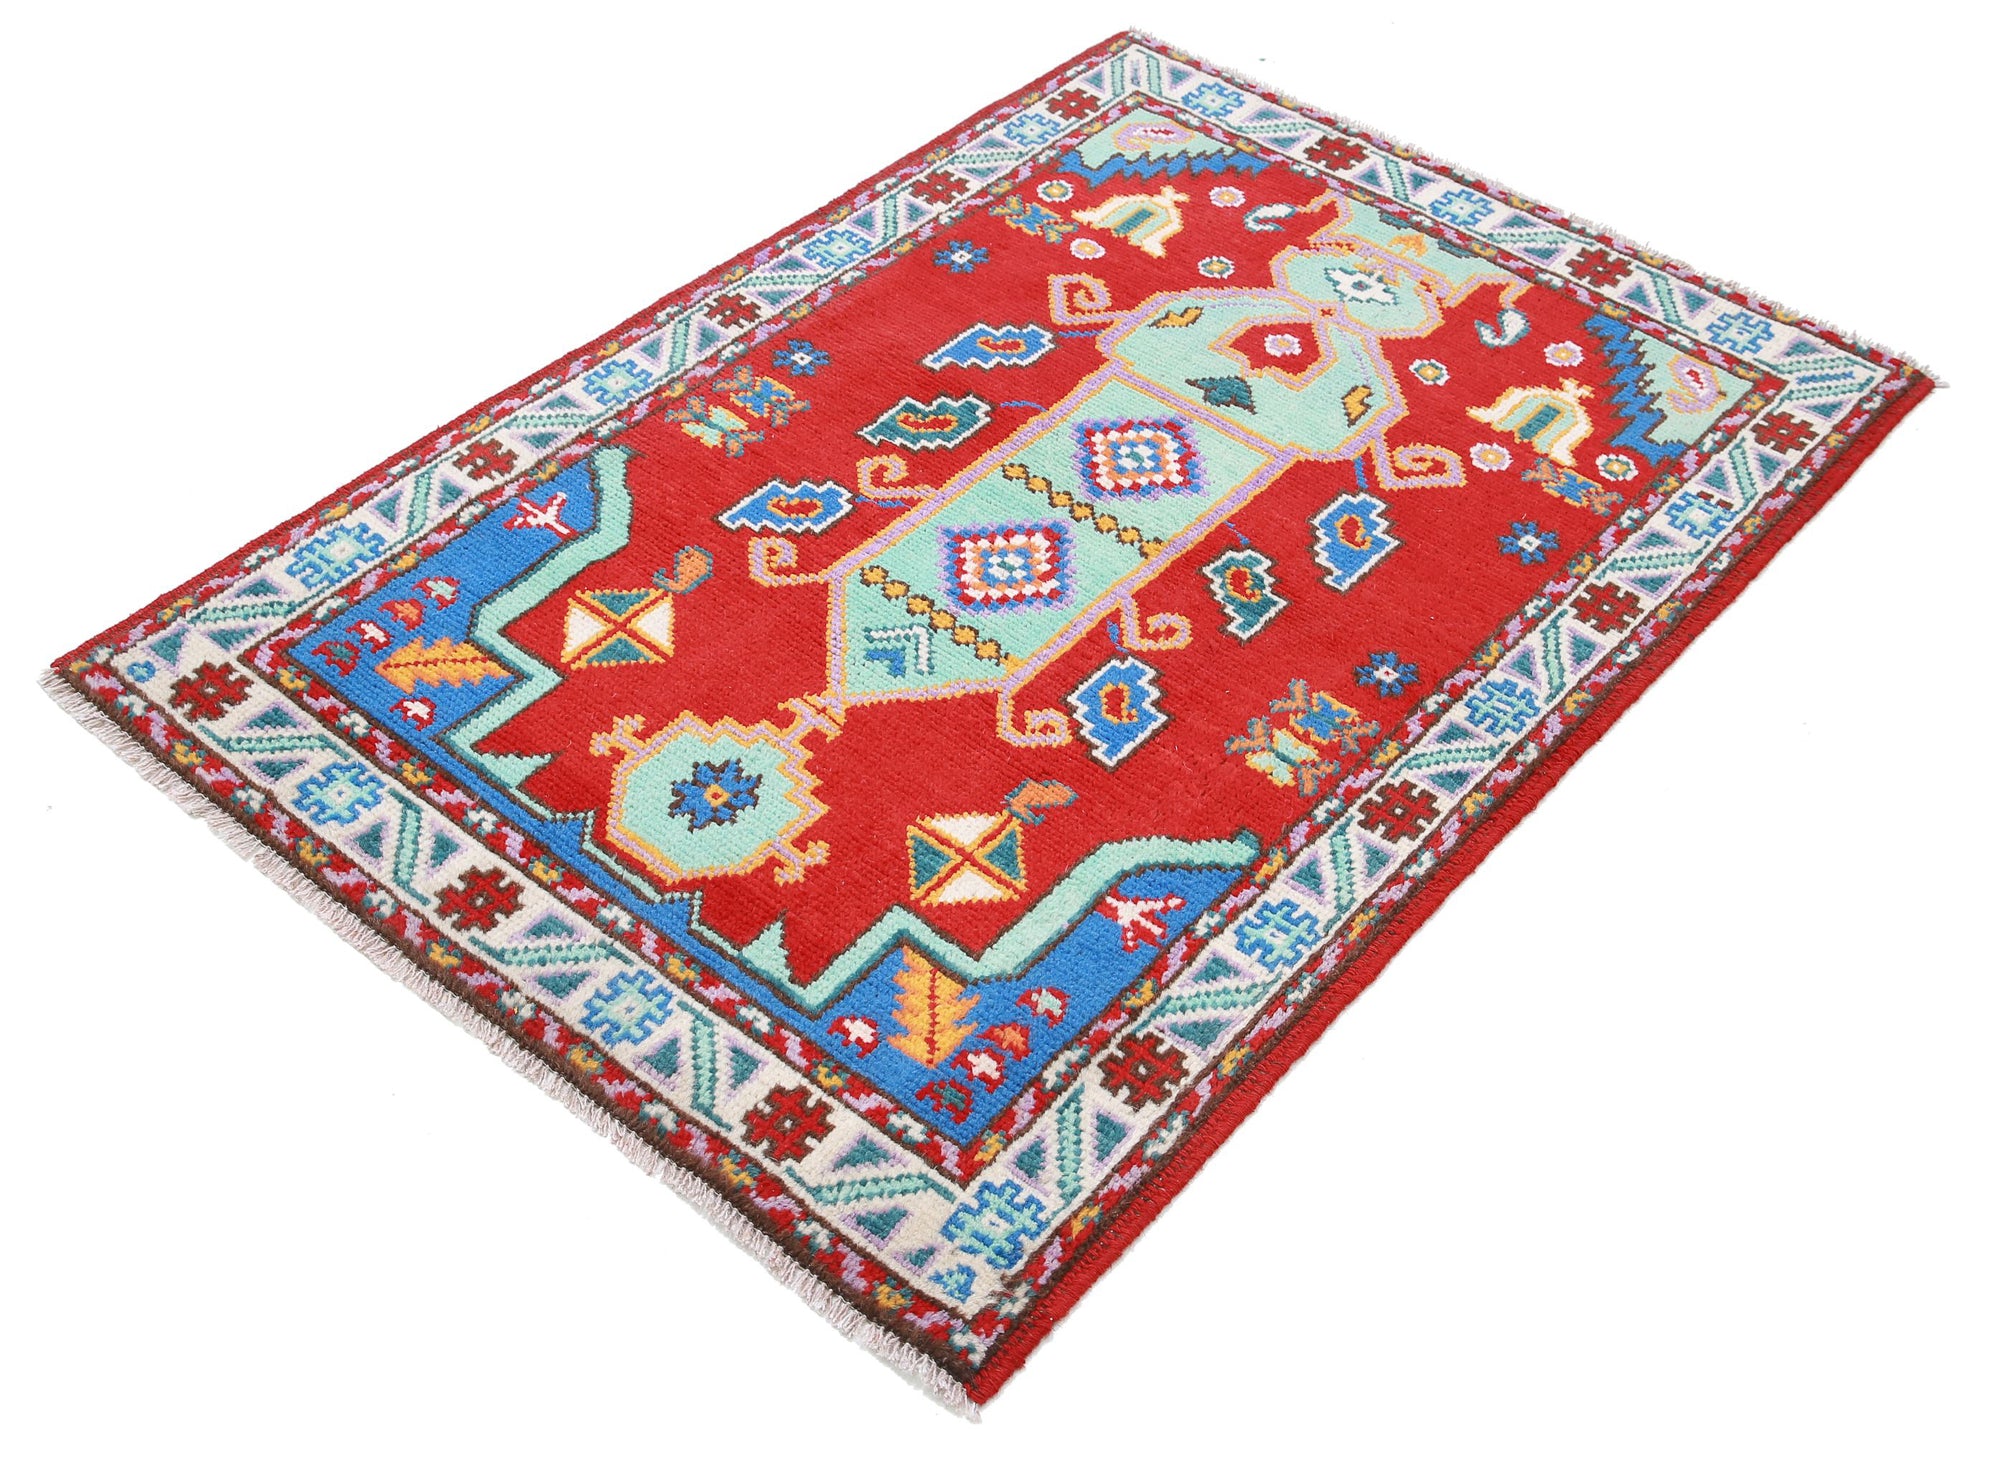 Revival-hand-knotted-qarghani-wool-rug-5014200-2.jpg